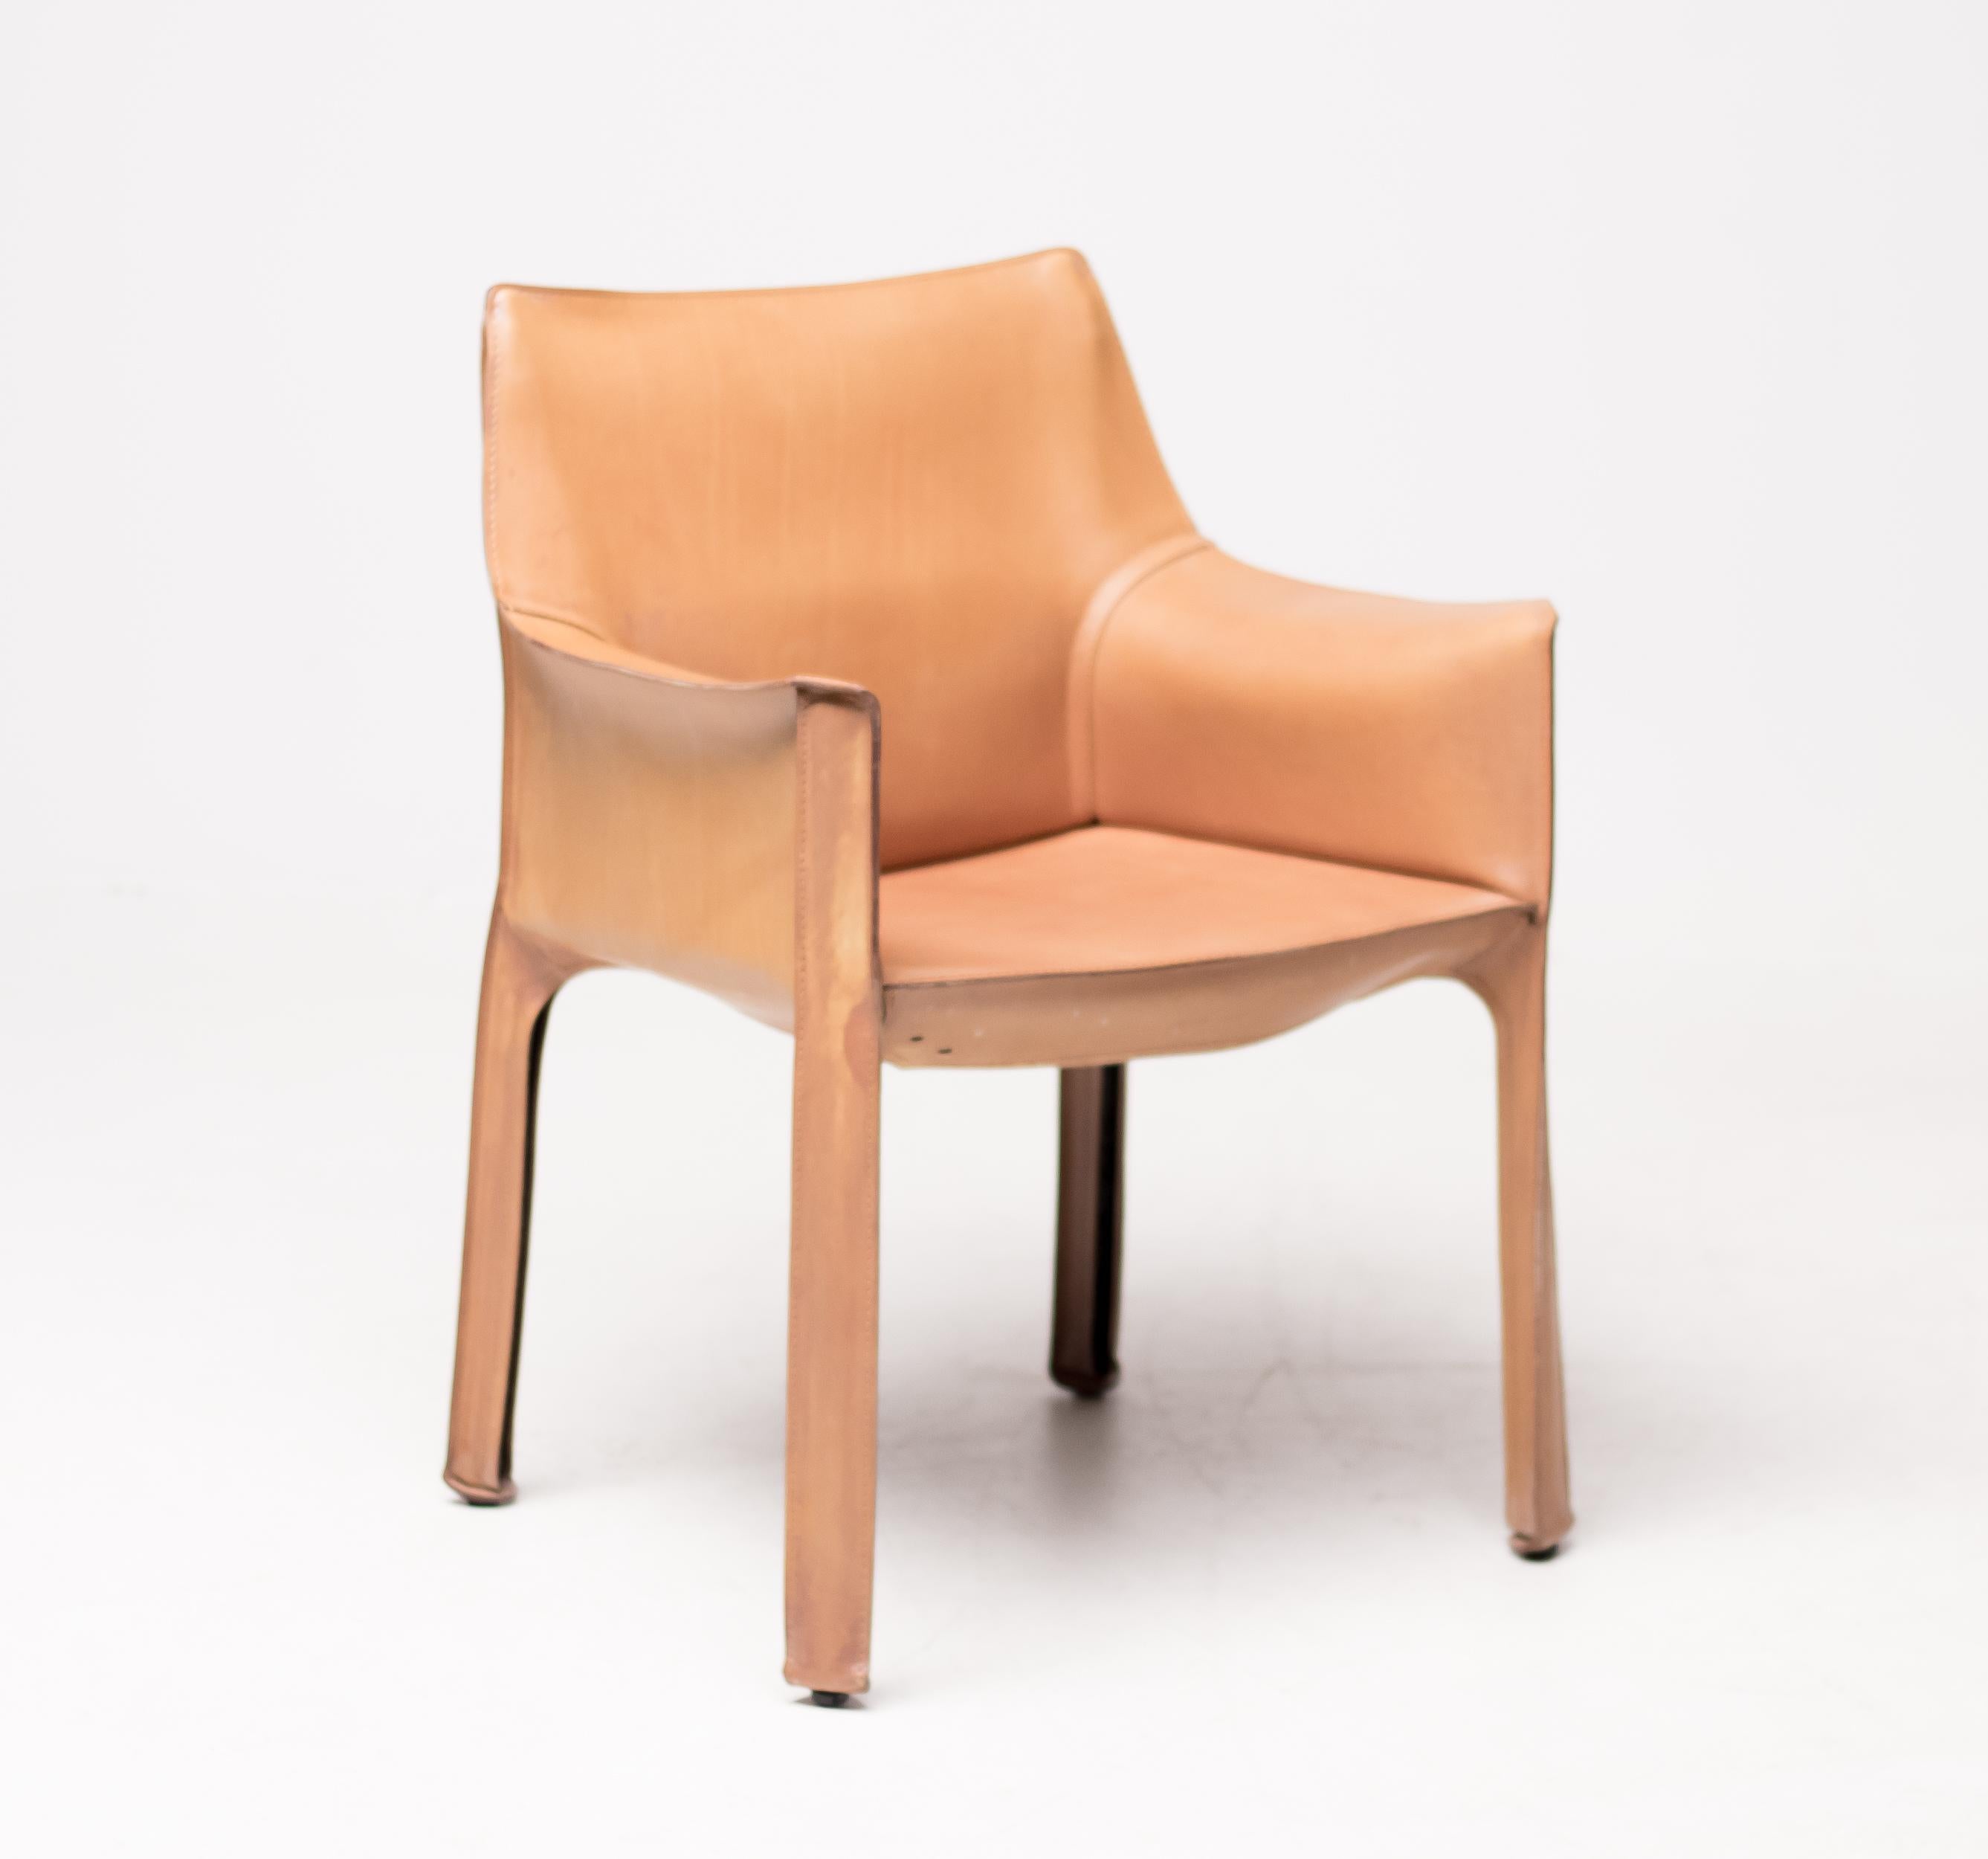 Bellini for Cassina cab chairs in natural Italian leather. High-quality chairs consisting of a leather cover stretched over a minimal tubular steel frame. The only additional reinforcement is provided by a rubber membrane plate that supports the